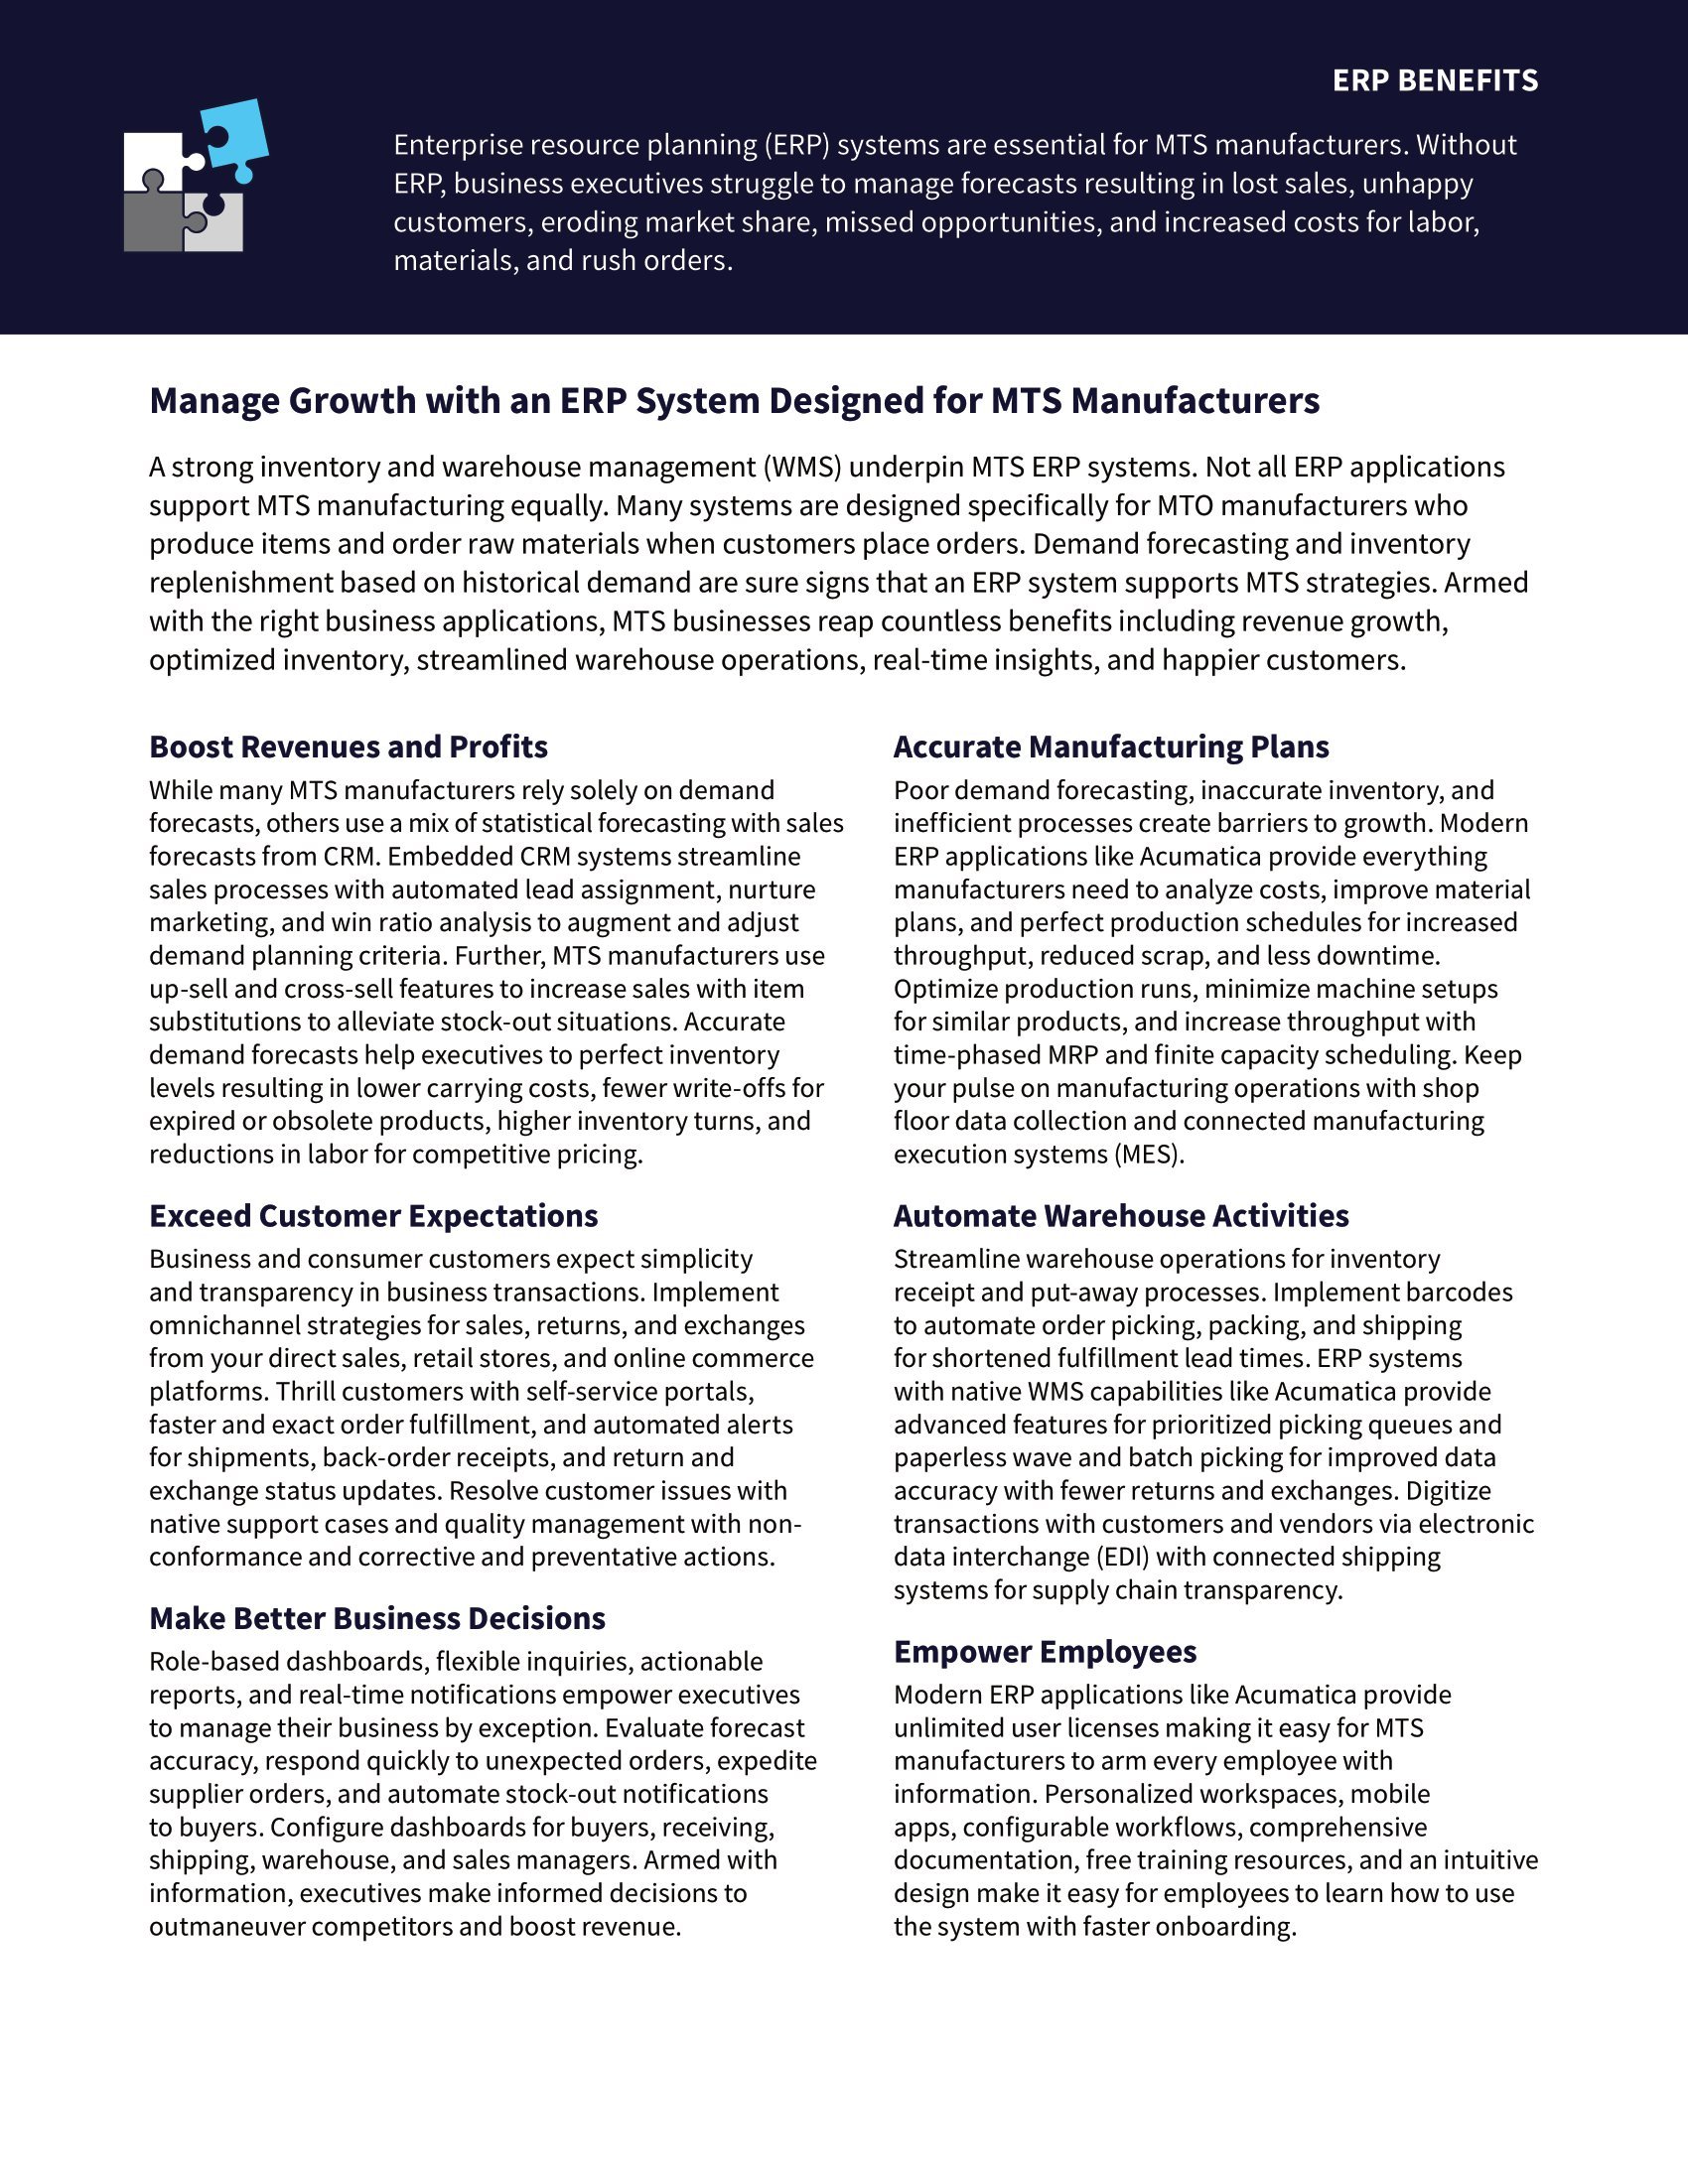 Acumatica’s Modern Cloud ERP Solution Empowers Multi-Modal Manufacturing Businesses to Fend off Competitors and Delight Customers, page 2